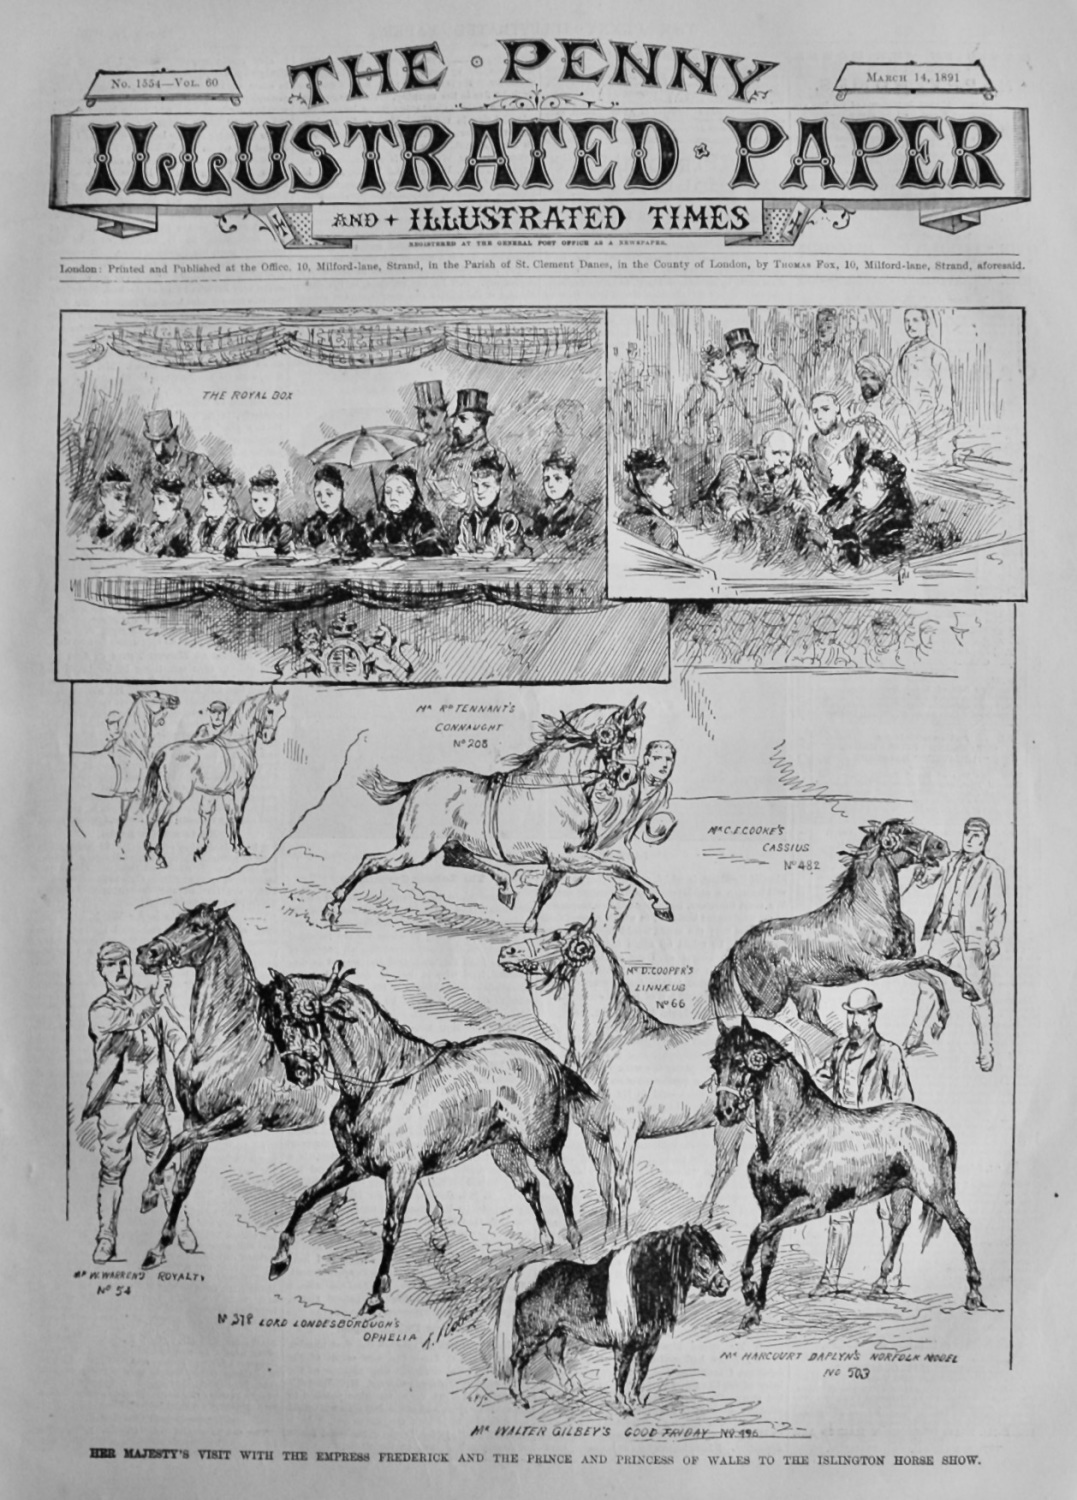 The Penny Illustrated Paper & Illustrated Times. March 14th, 1891.